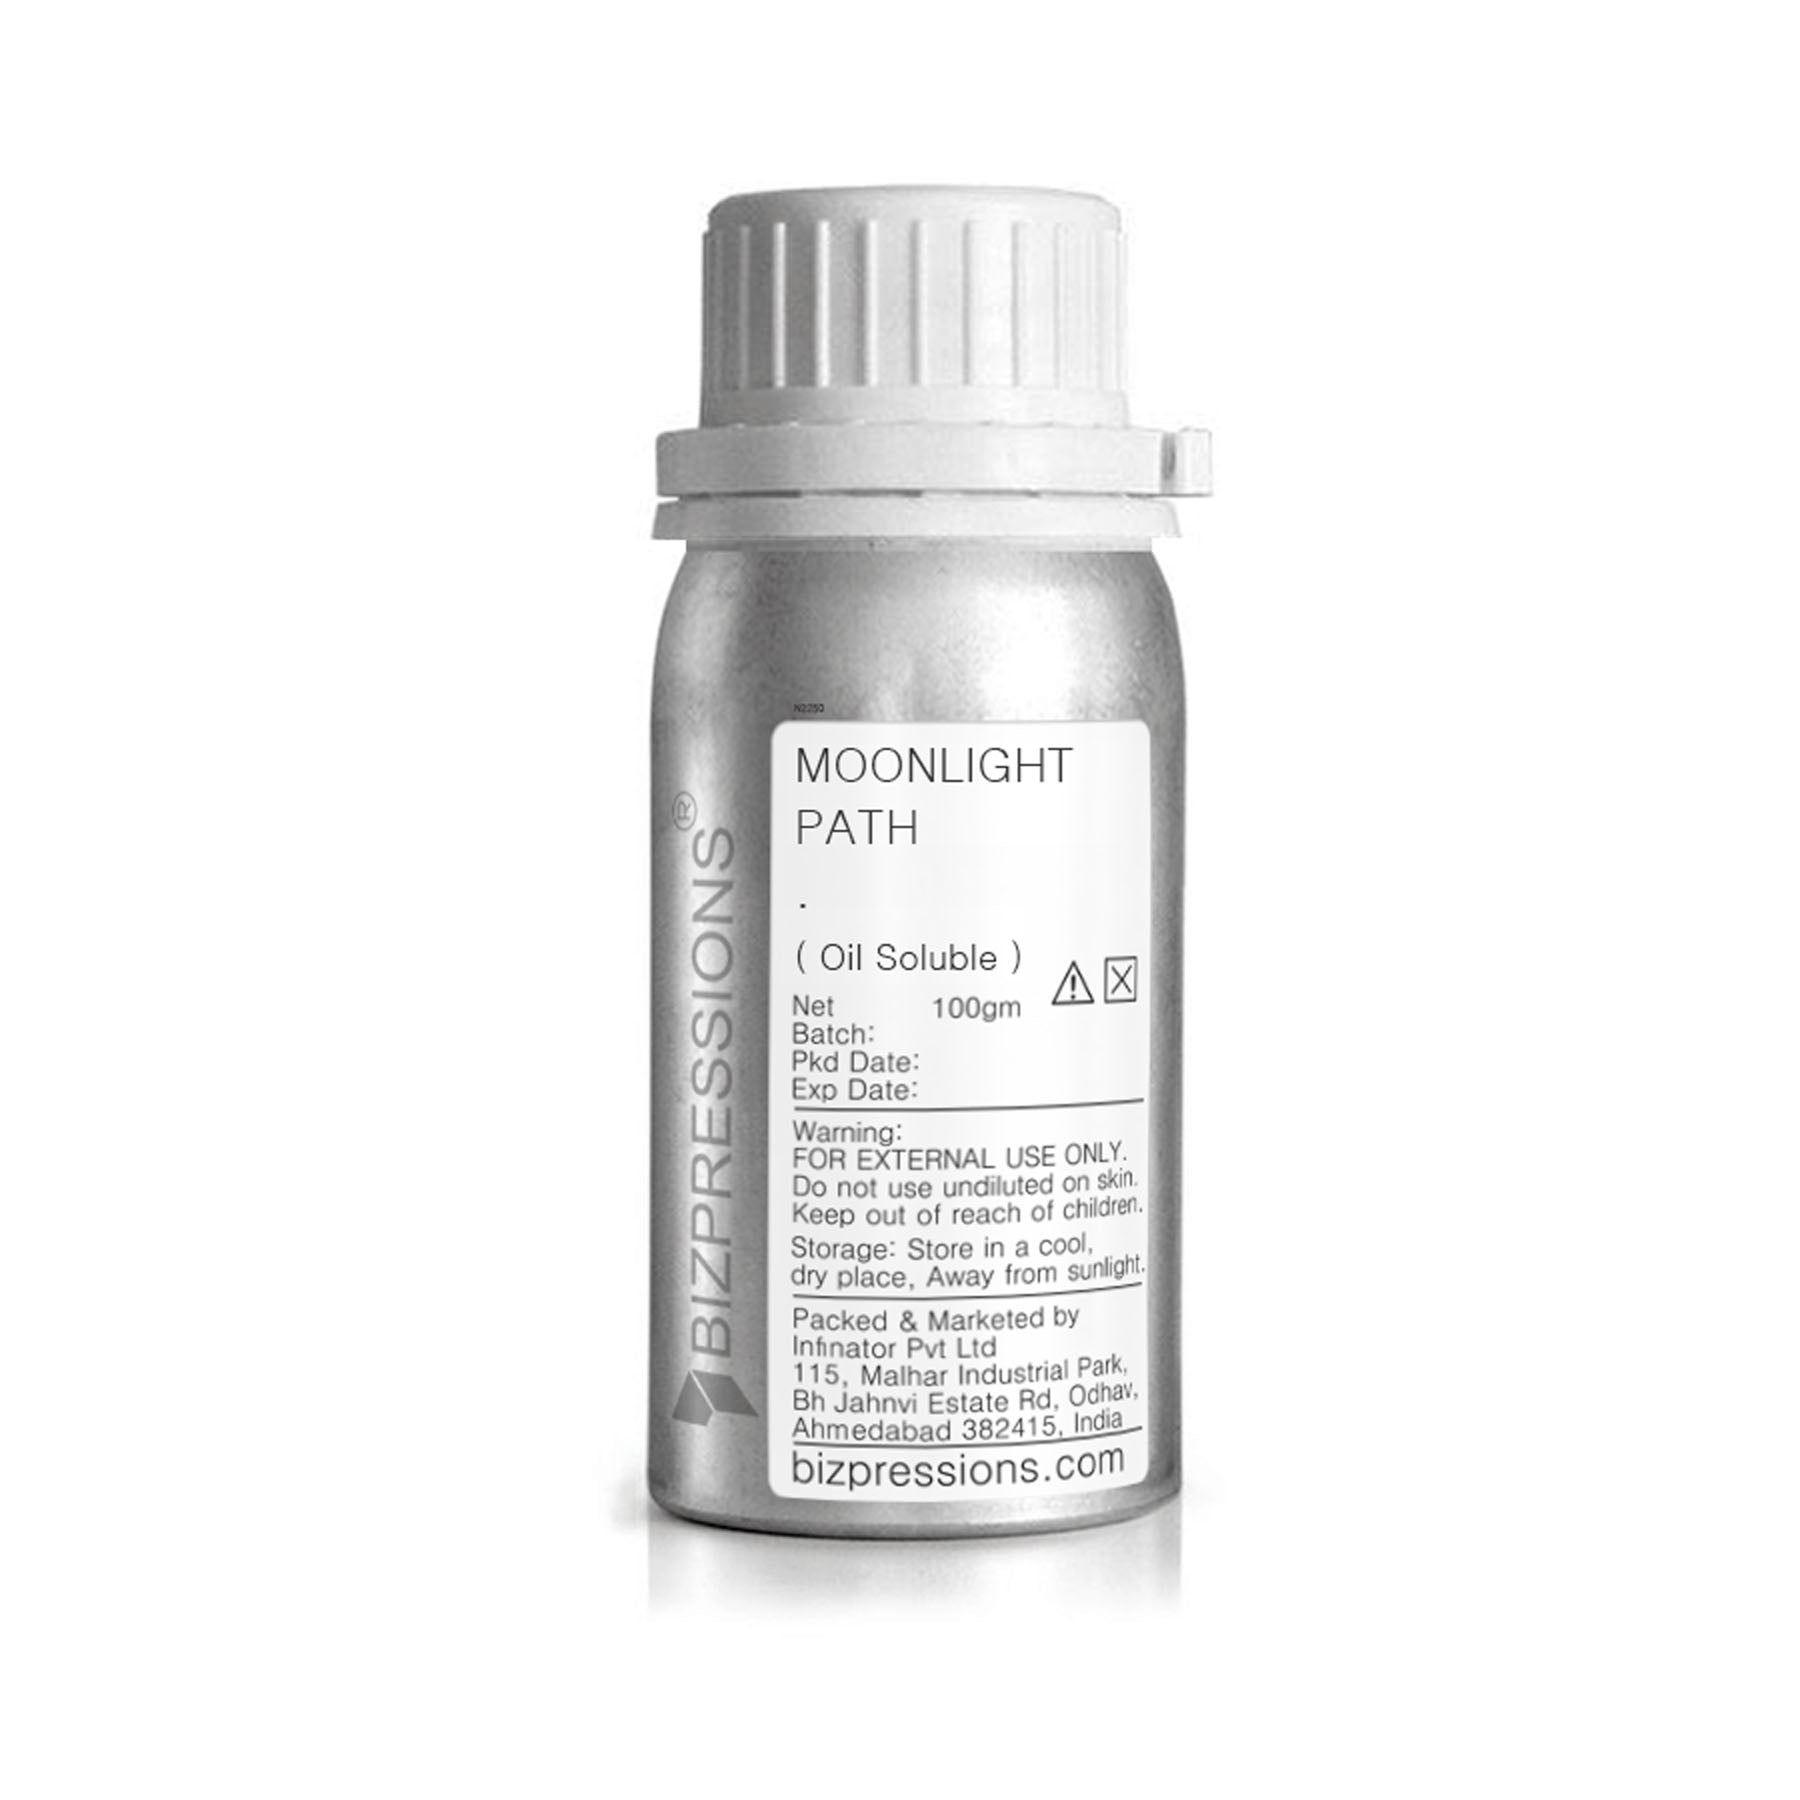 MOONLIGHT PATH - Fragrance ( Oil Soluble ) - 100 gm